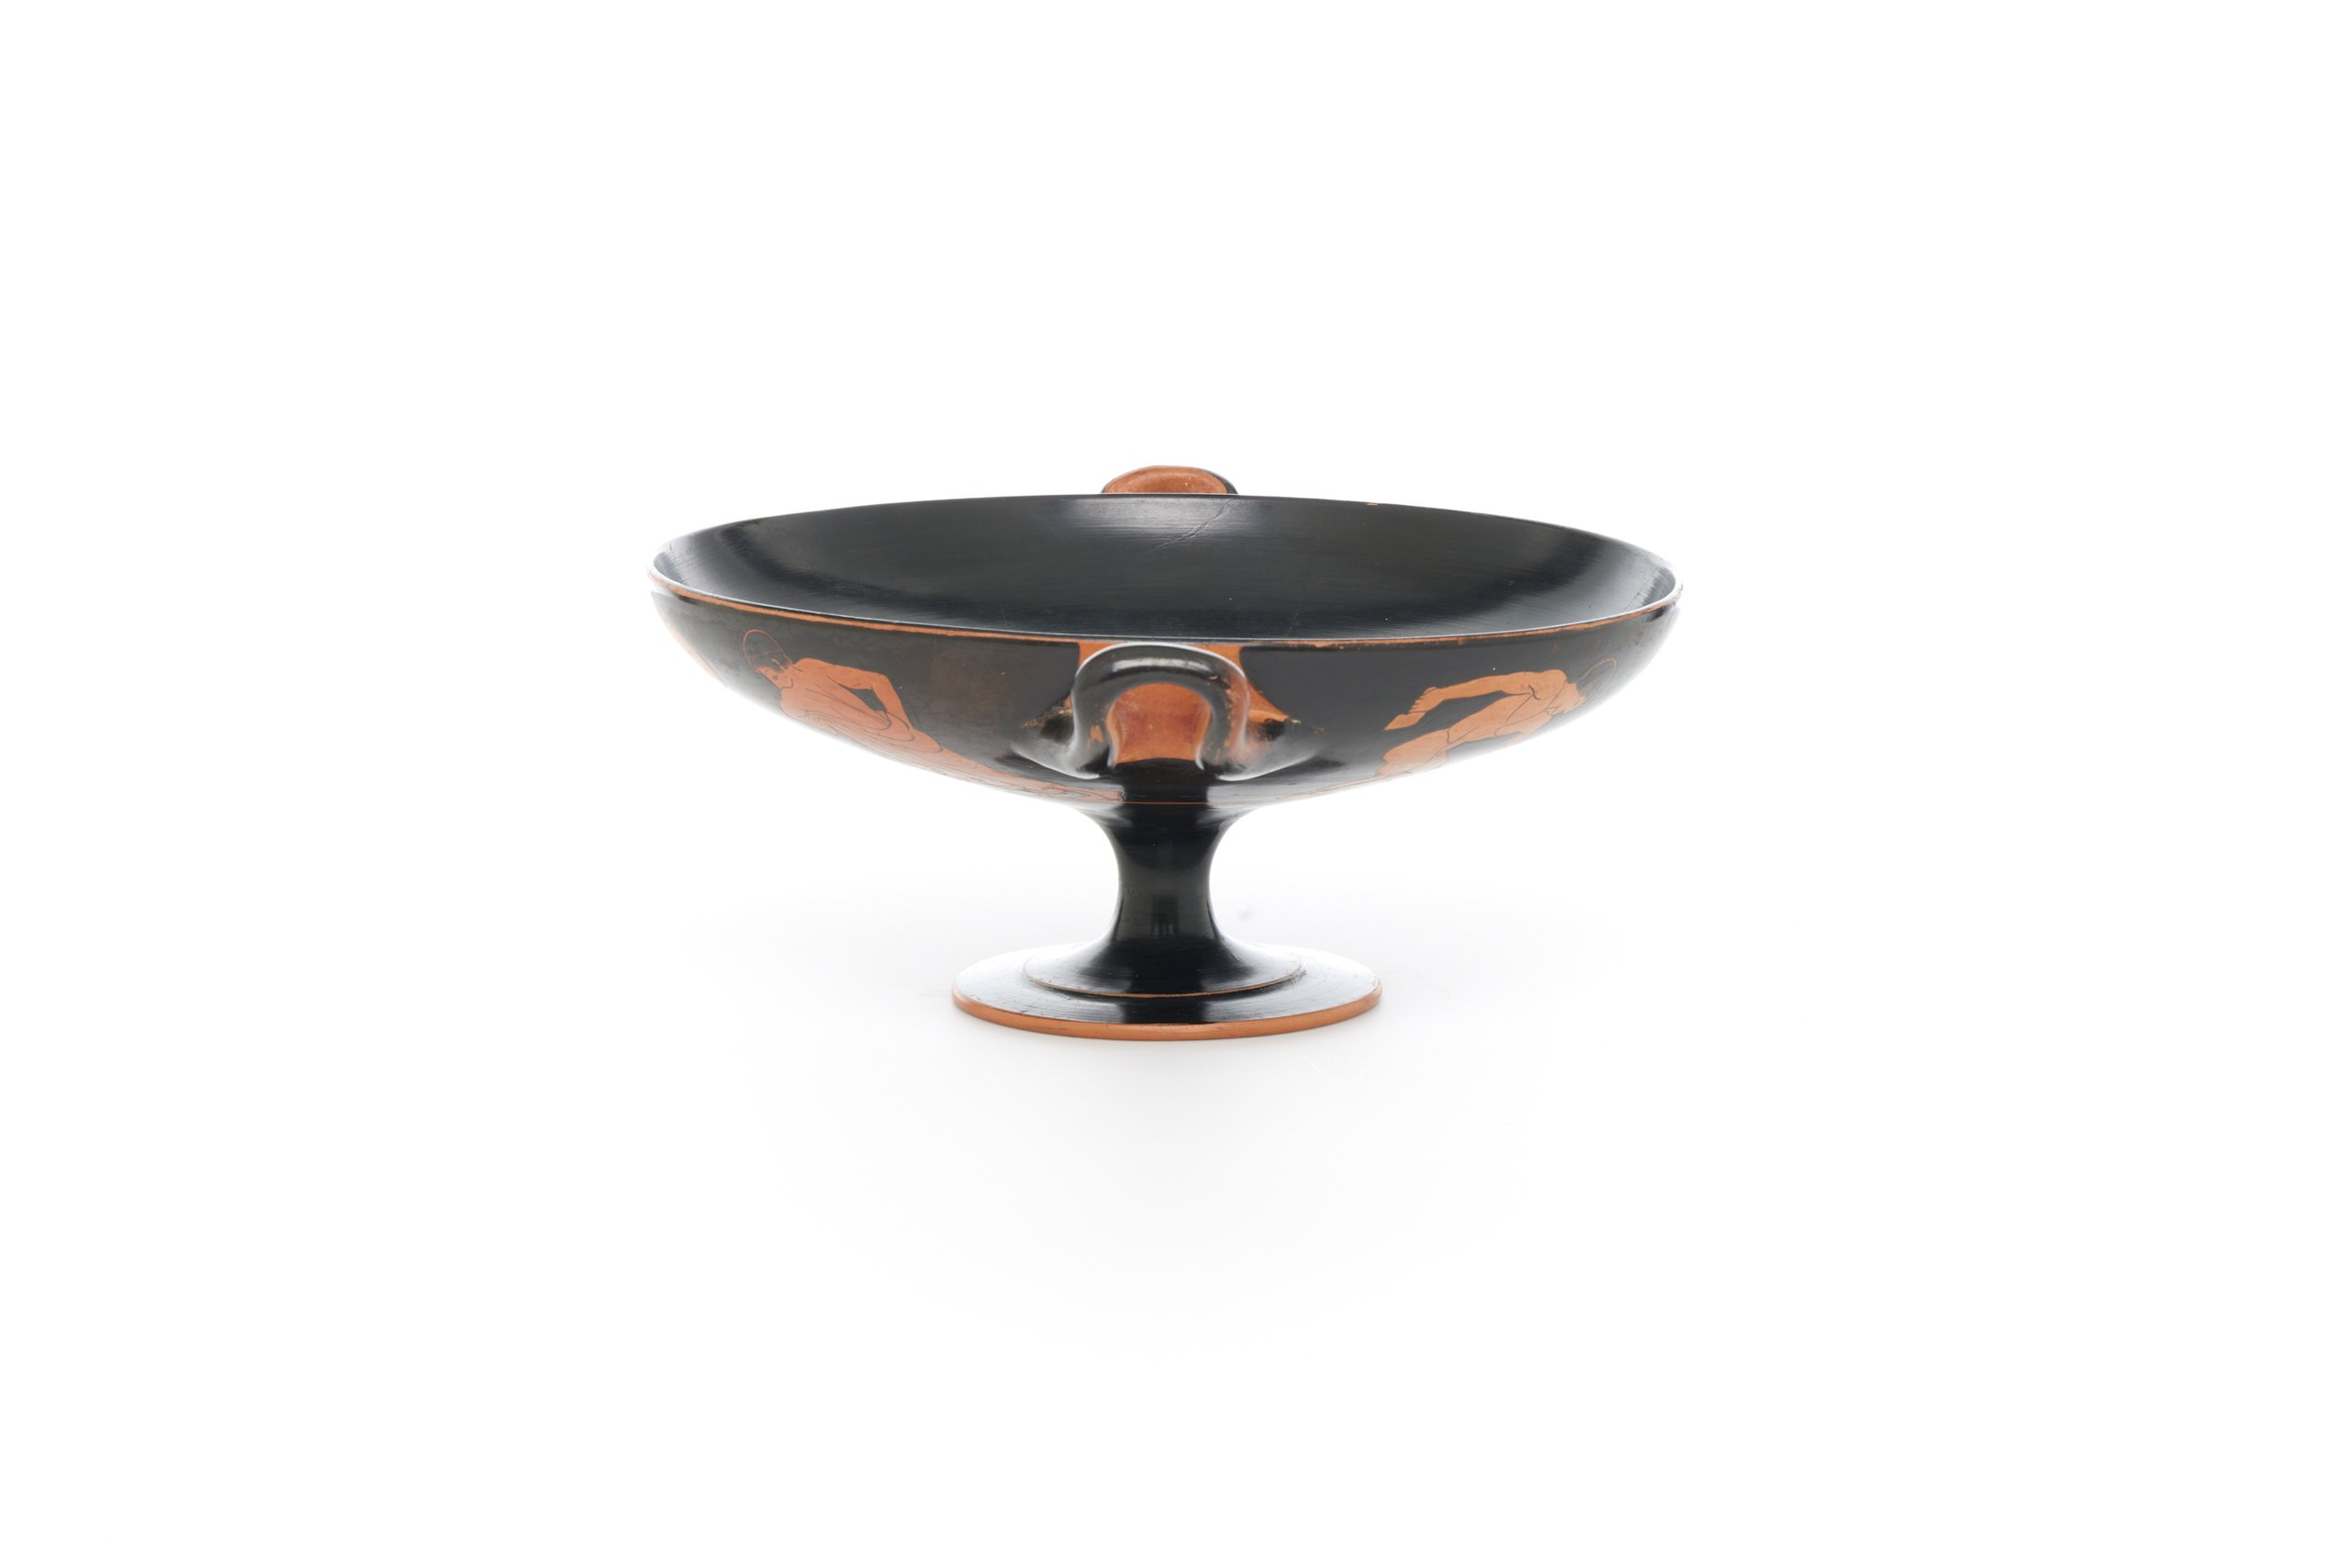 Greek kylix attributed to the Antiphon Painter